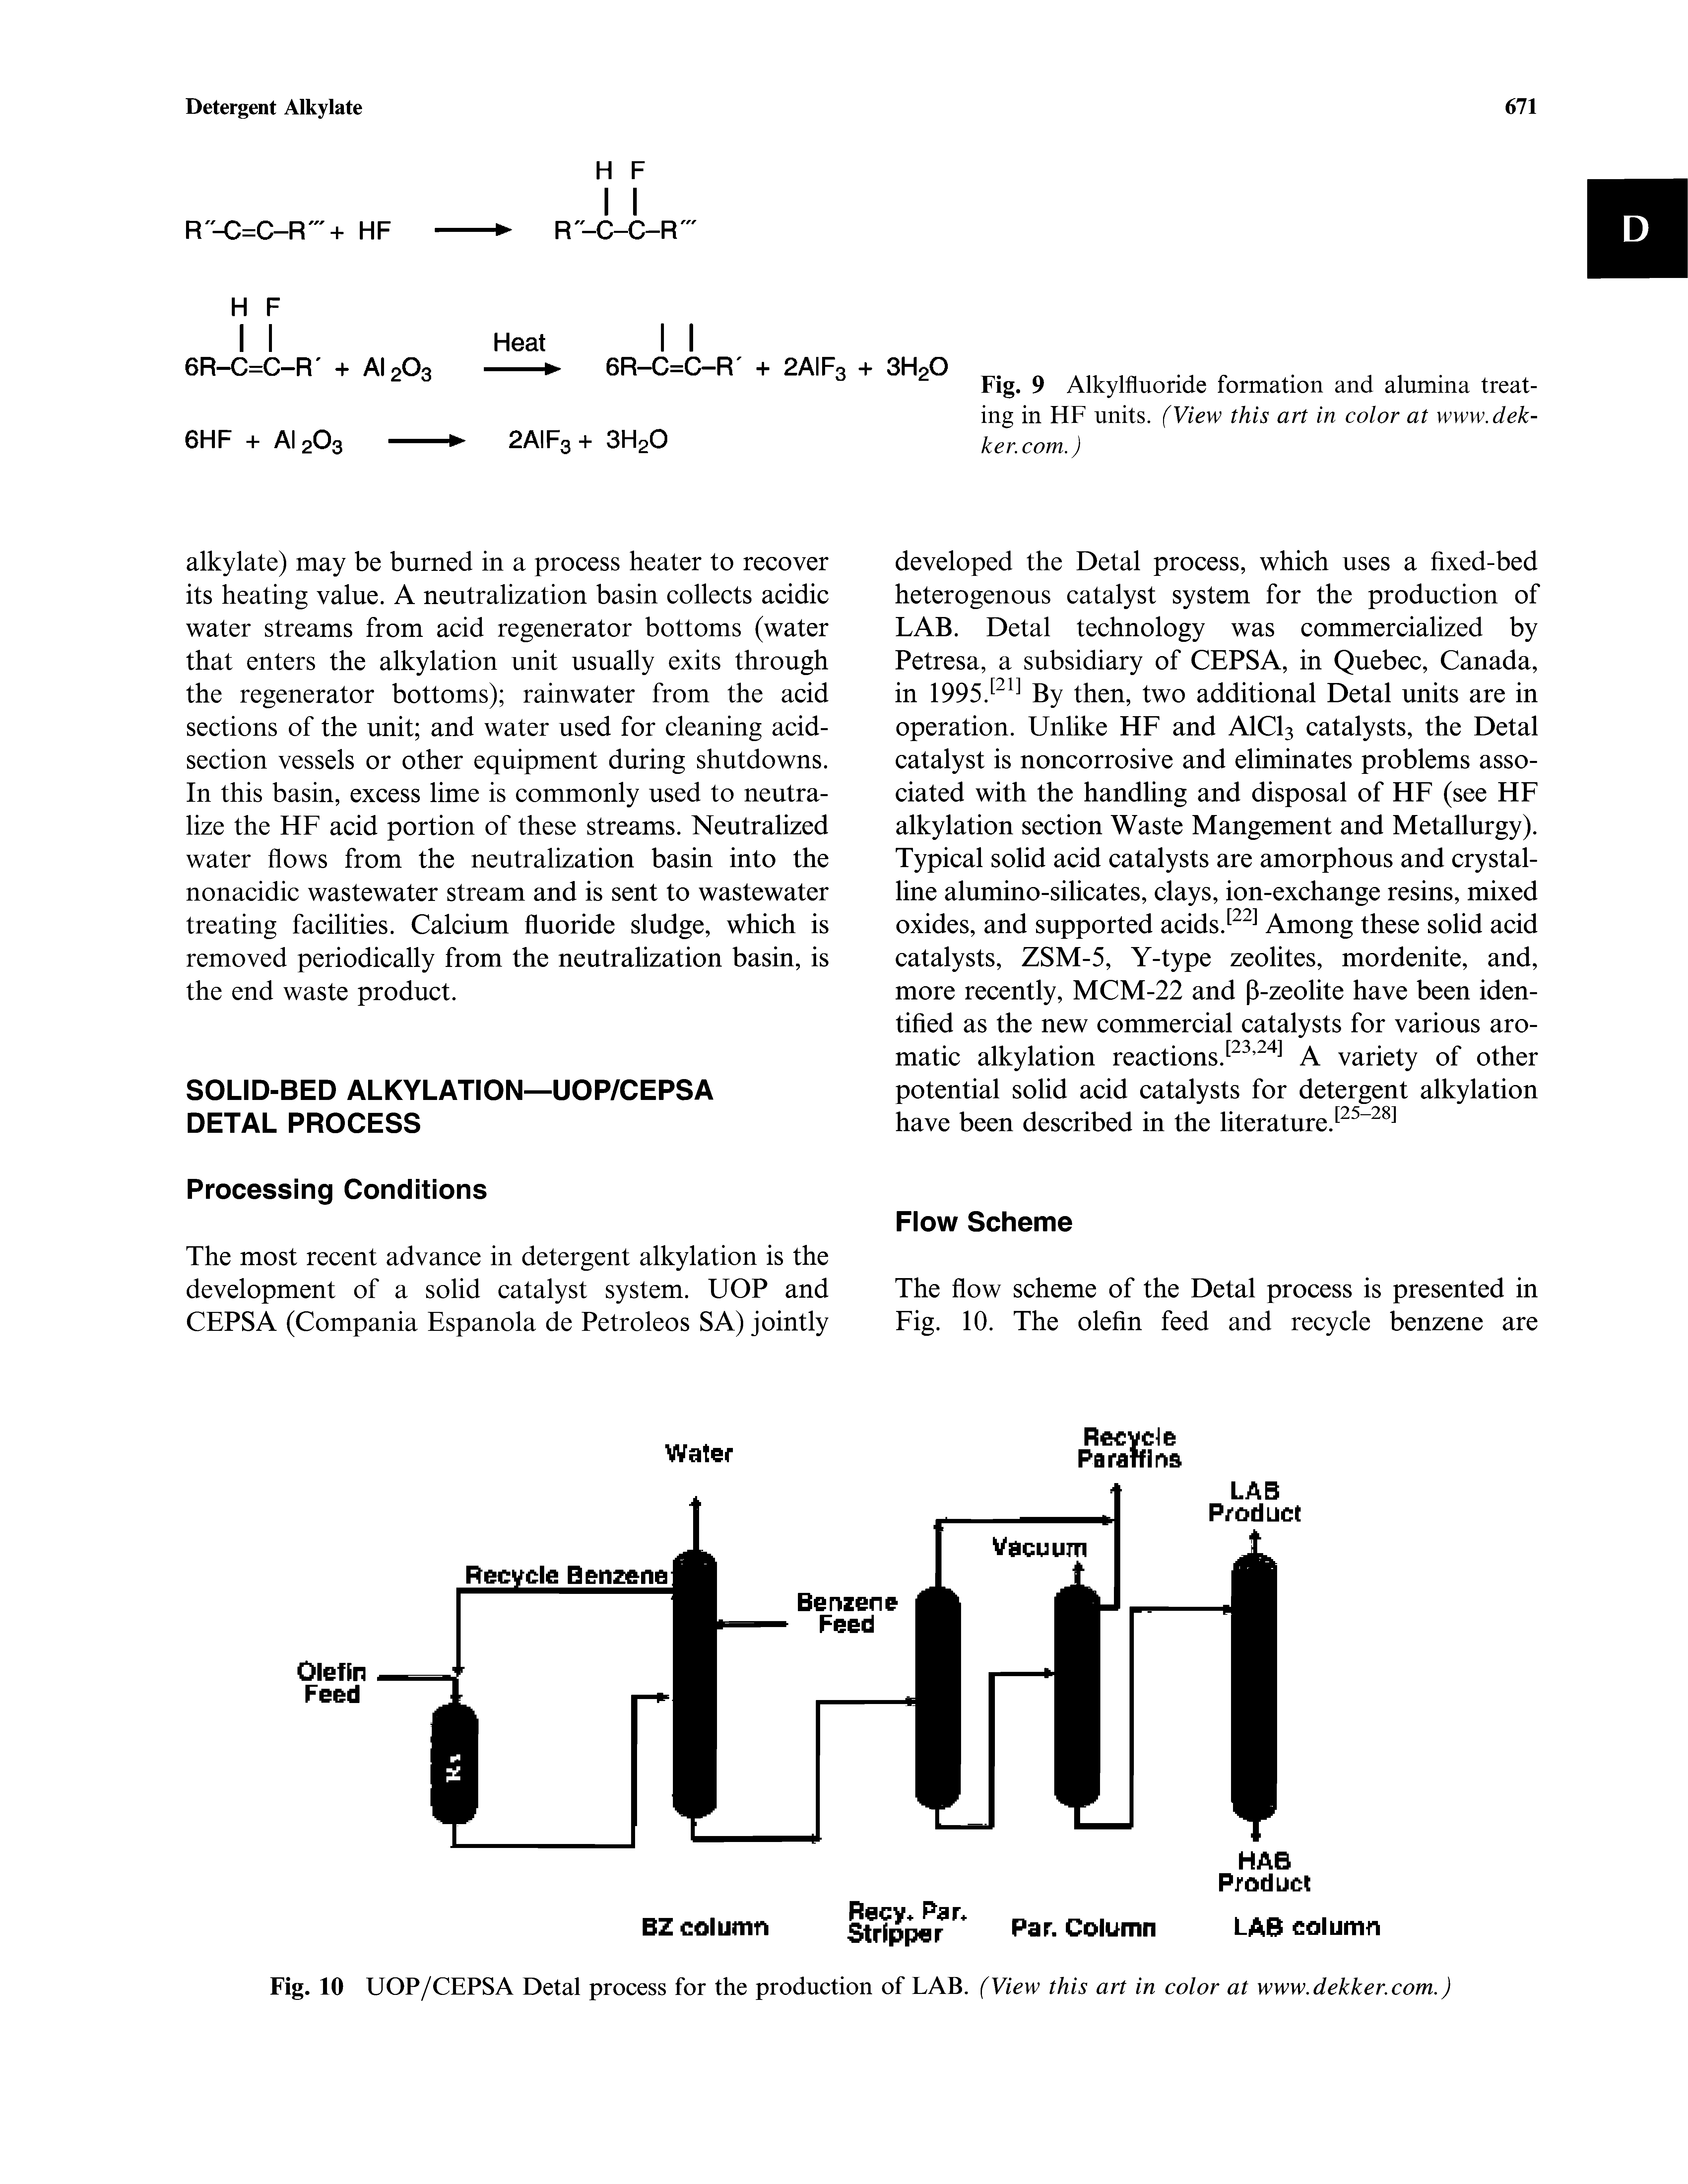 Fig. 10 UOP/CEPSA Detal process for the production of LAB. (View this art in color at www.dekker.com.)...